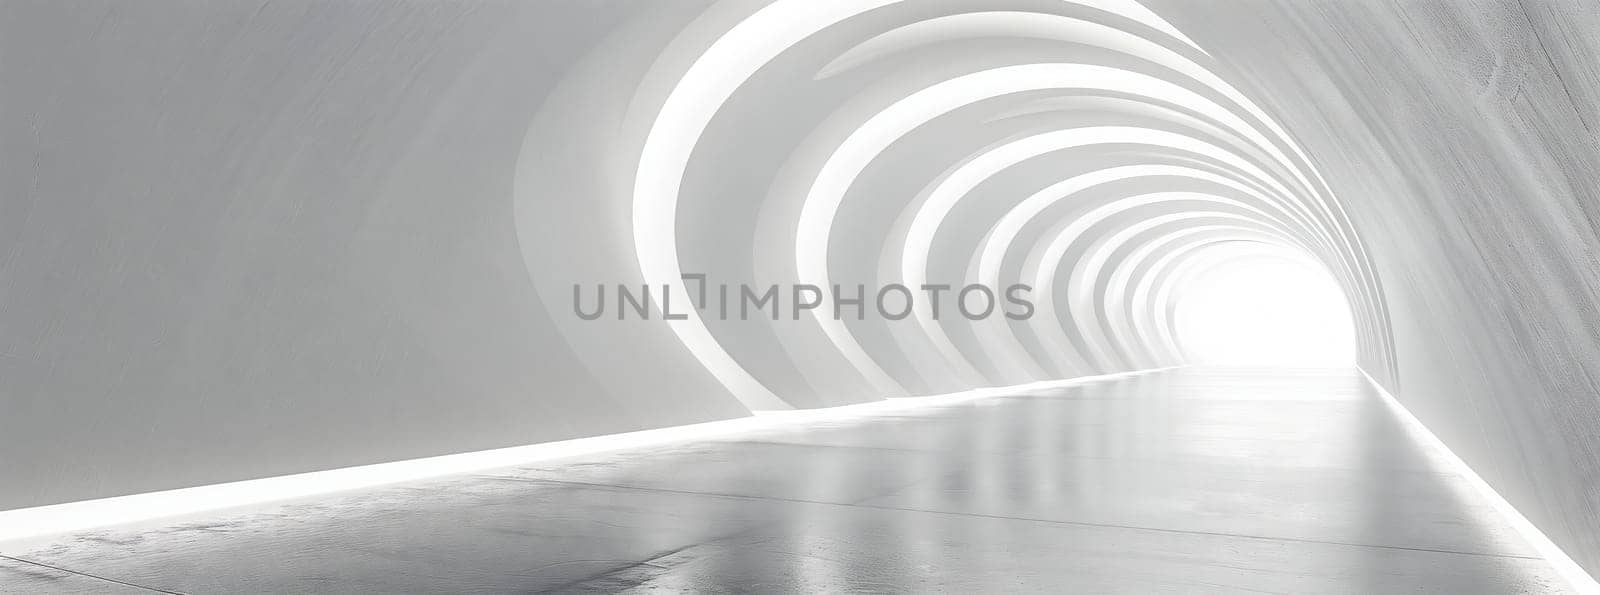 A grey tunnel resembling a circle pattern with a light shining at the end by richwolf